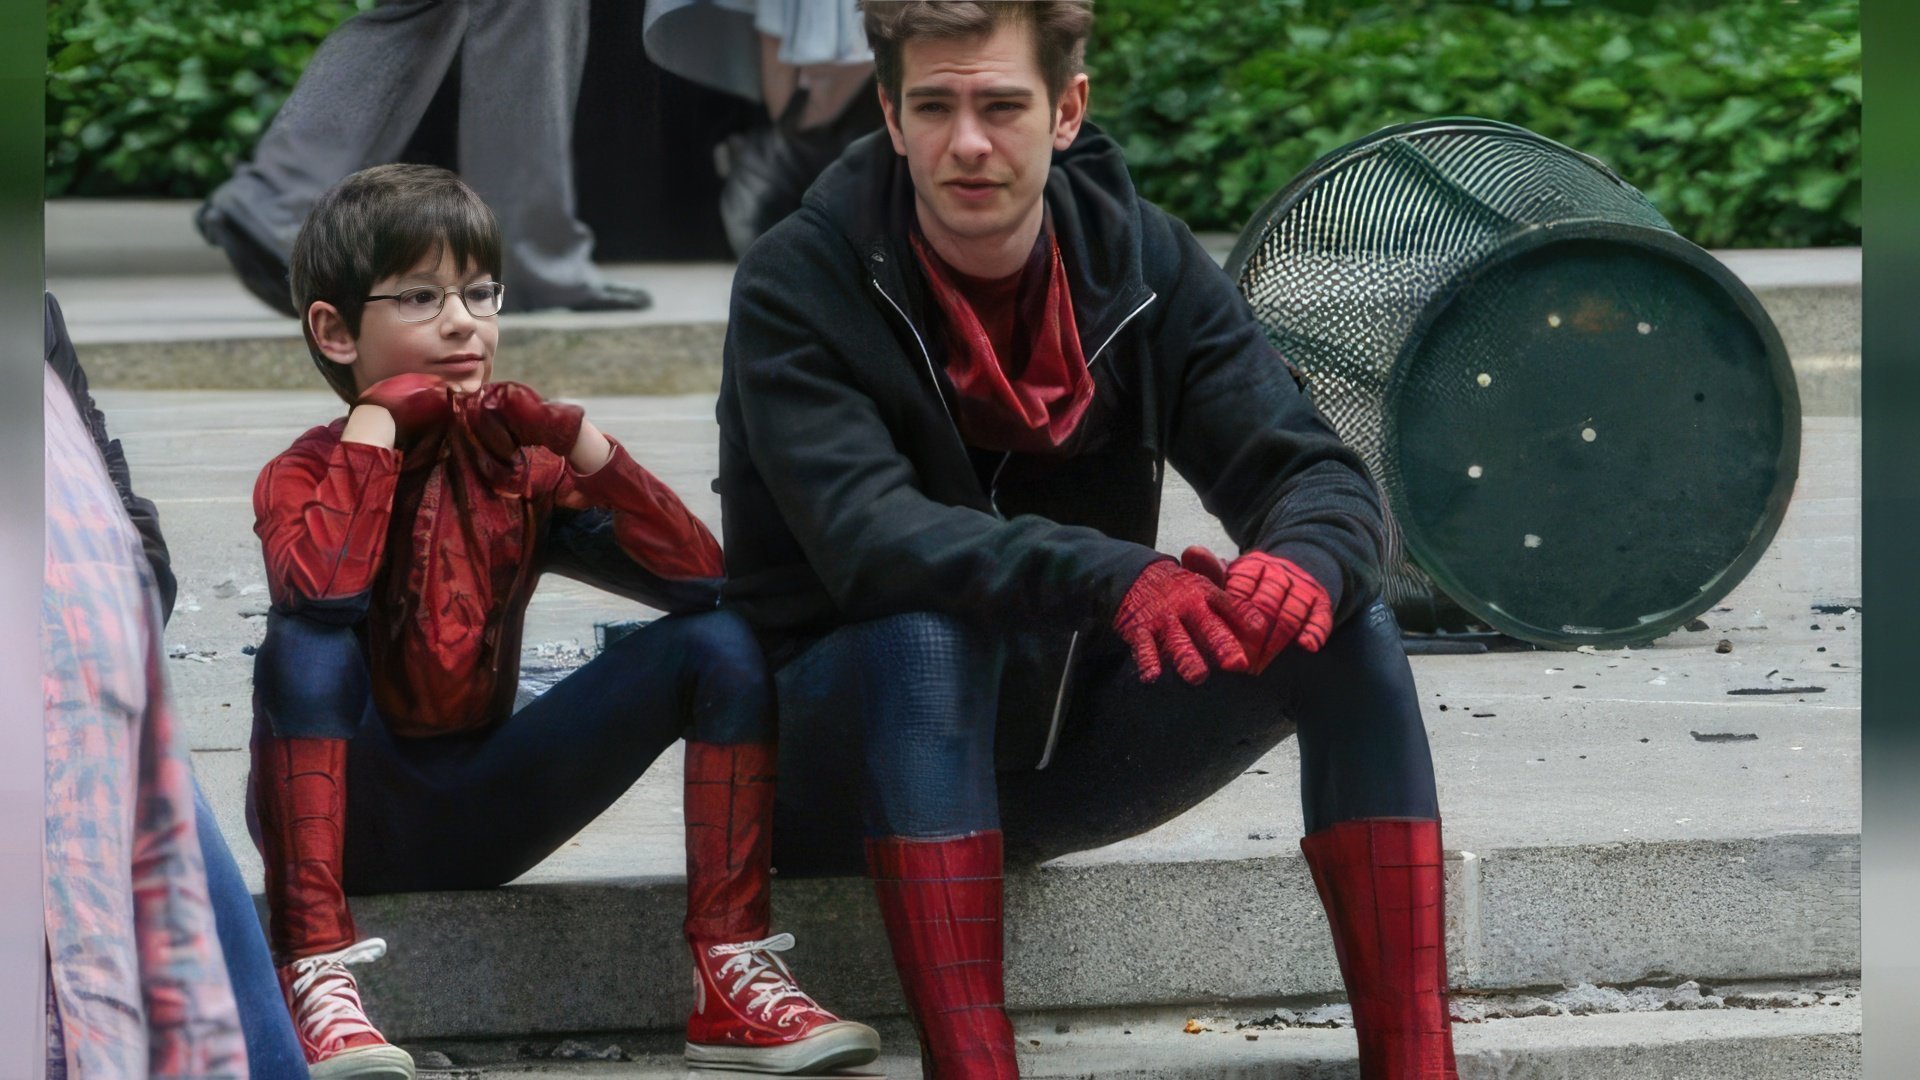 On the set of Spider-Man